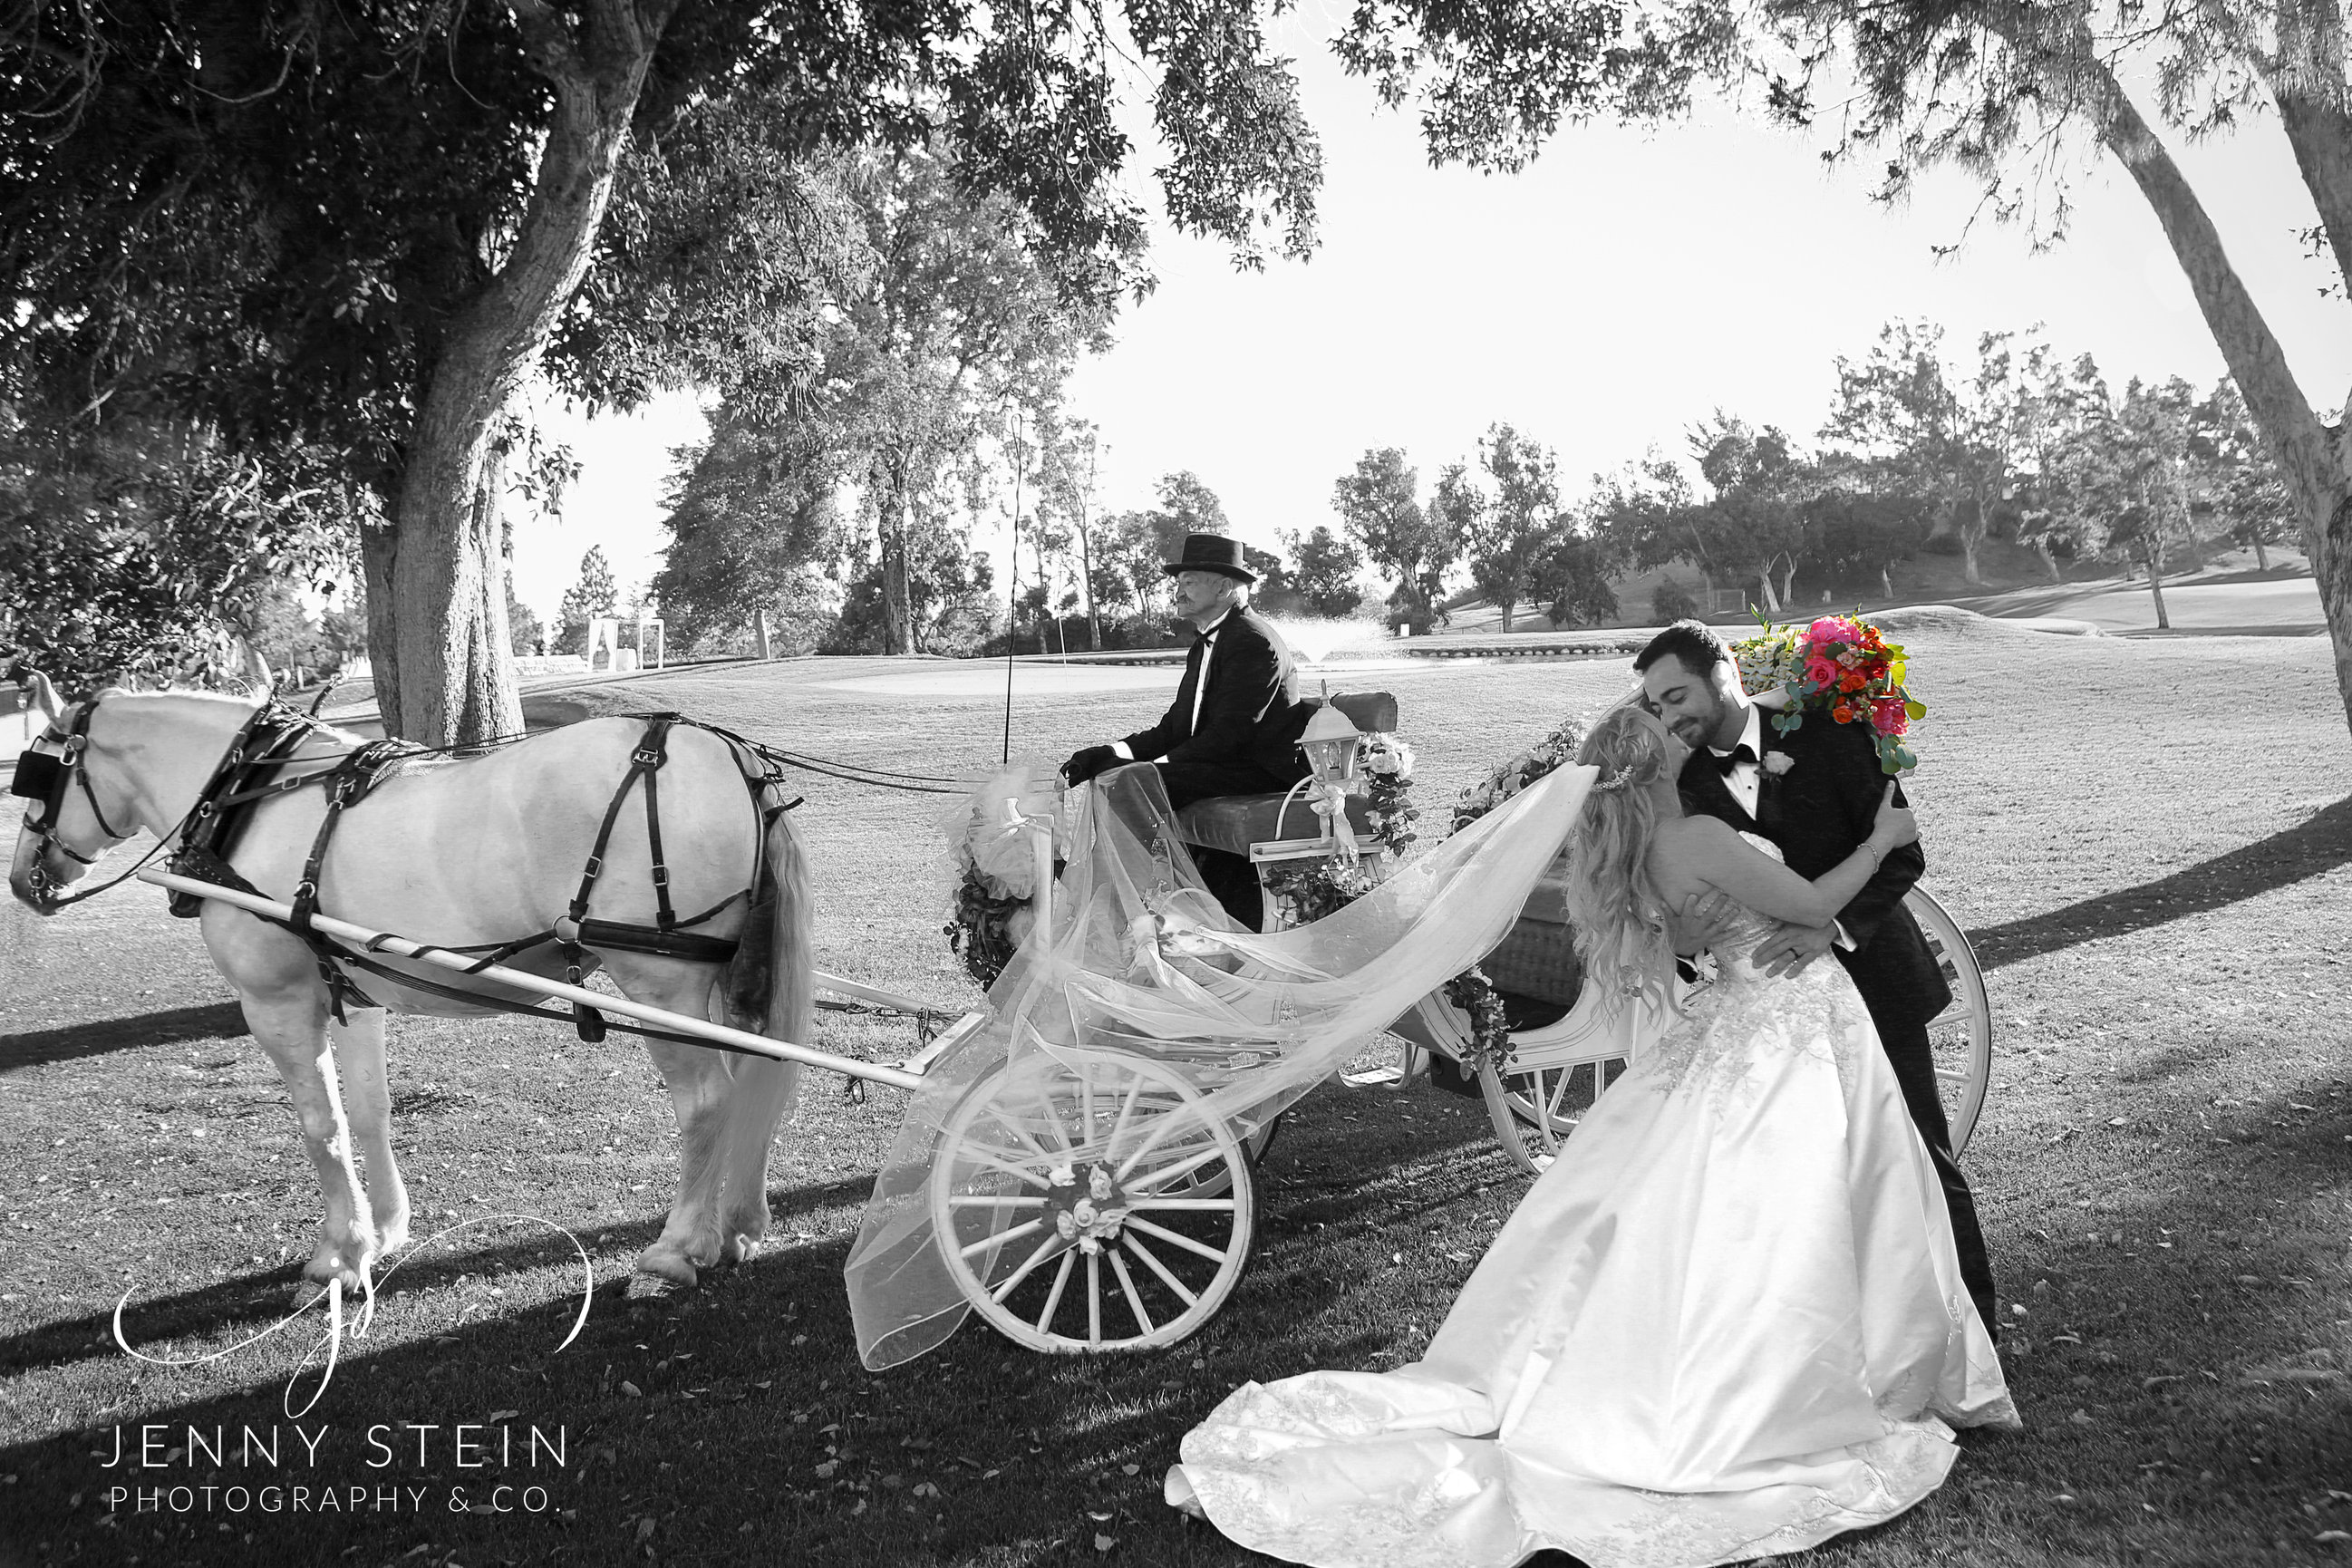 Love & Marriage go together like a Horse & Carriage - Jennifer E. Stein - Love And Marriage Go Together Like A Horse And Carriage